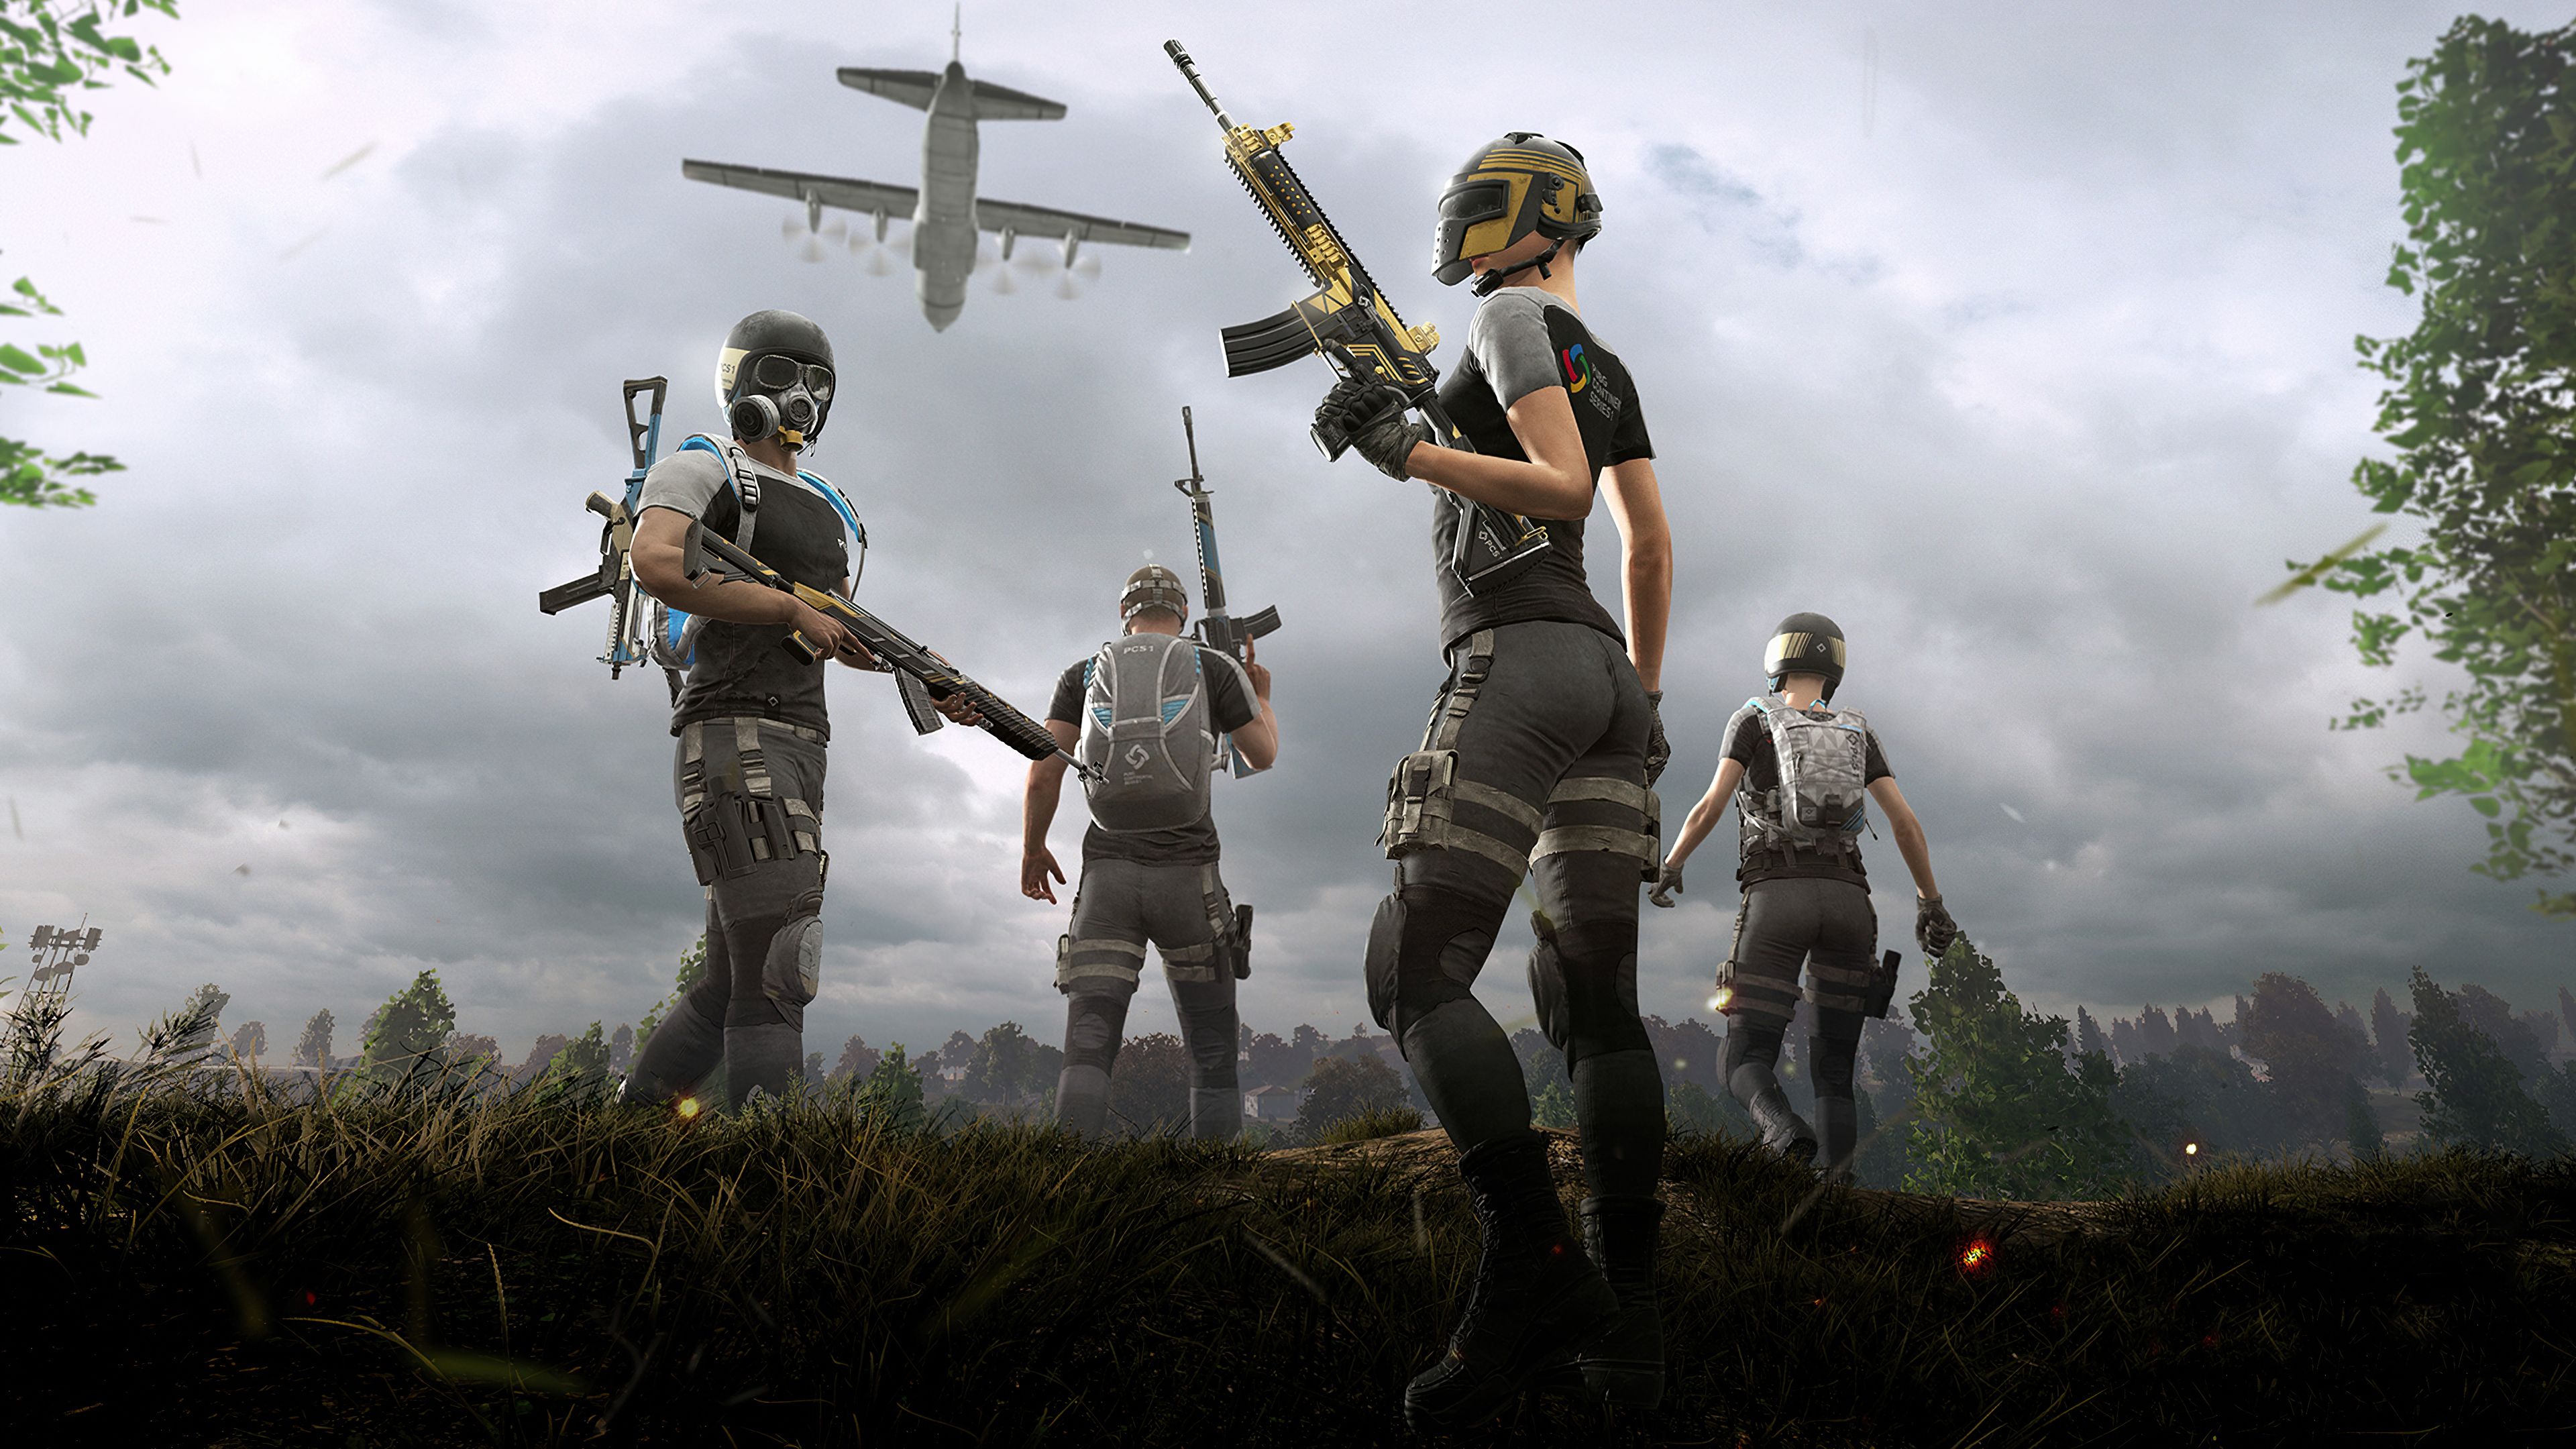 Pubg Mobile 4k 2020 Chromebook Pixel HD 4k Wallpaper, Image, Background, Photo and Picture